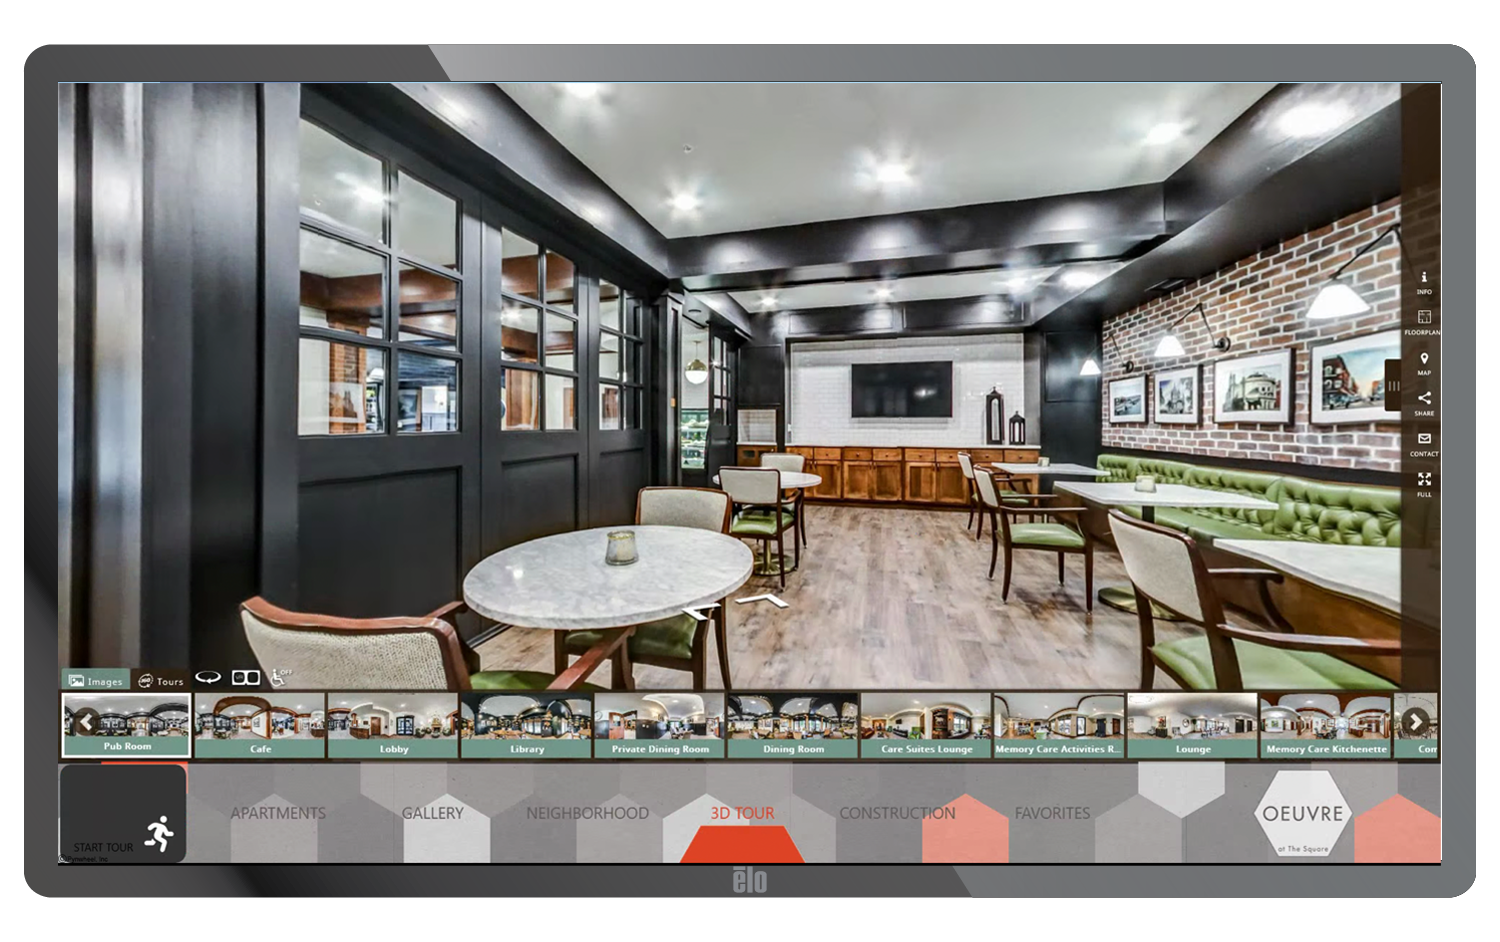 Pynwheel touchscreen showcasing 3D tour of apartment community- Expressionist design